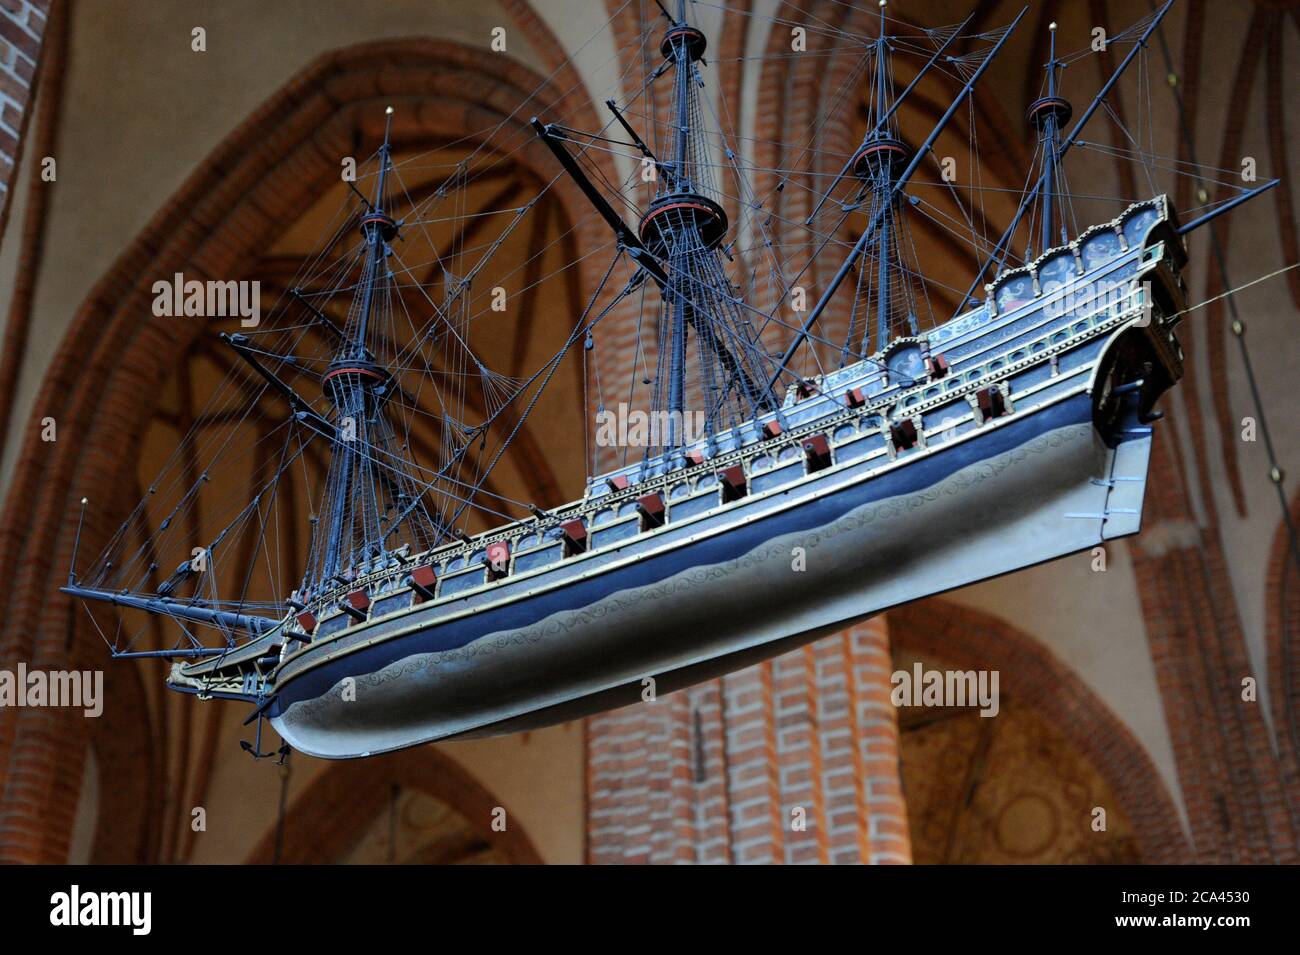 Sweden, Stockholm. English Galleon, 16th century. Votive ship hanging from the ceiling of the Cathedral of Saint Nicholas. One of the oldest votive ships in the world. This ship model is a copy of the original made in 1950s. The original ship model was built around 1600, today kept in the Museum of Maritime History in Stockholm. The ship-type is an Elizabethan galleon, as at the end of the 15th century. Stock Photo